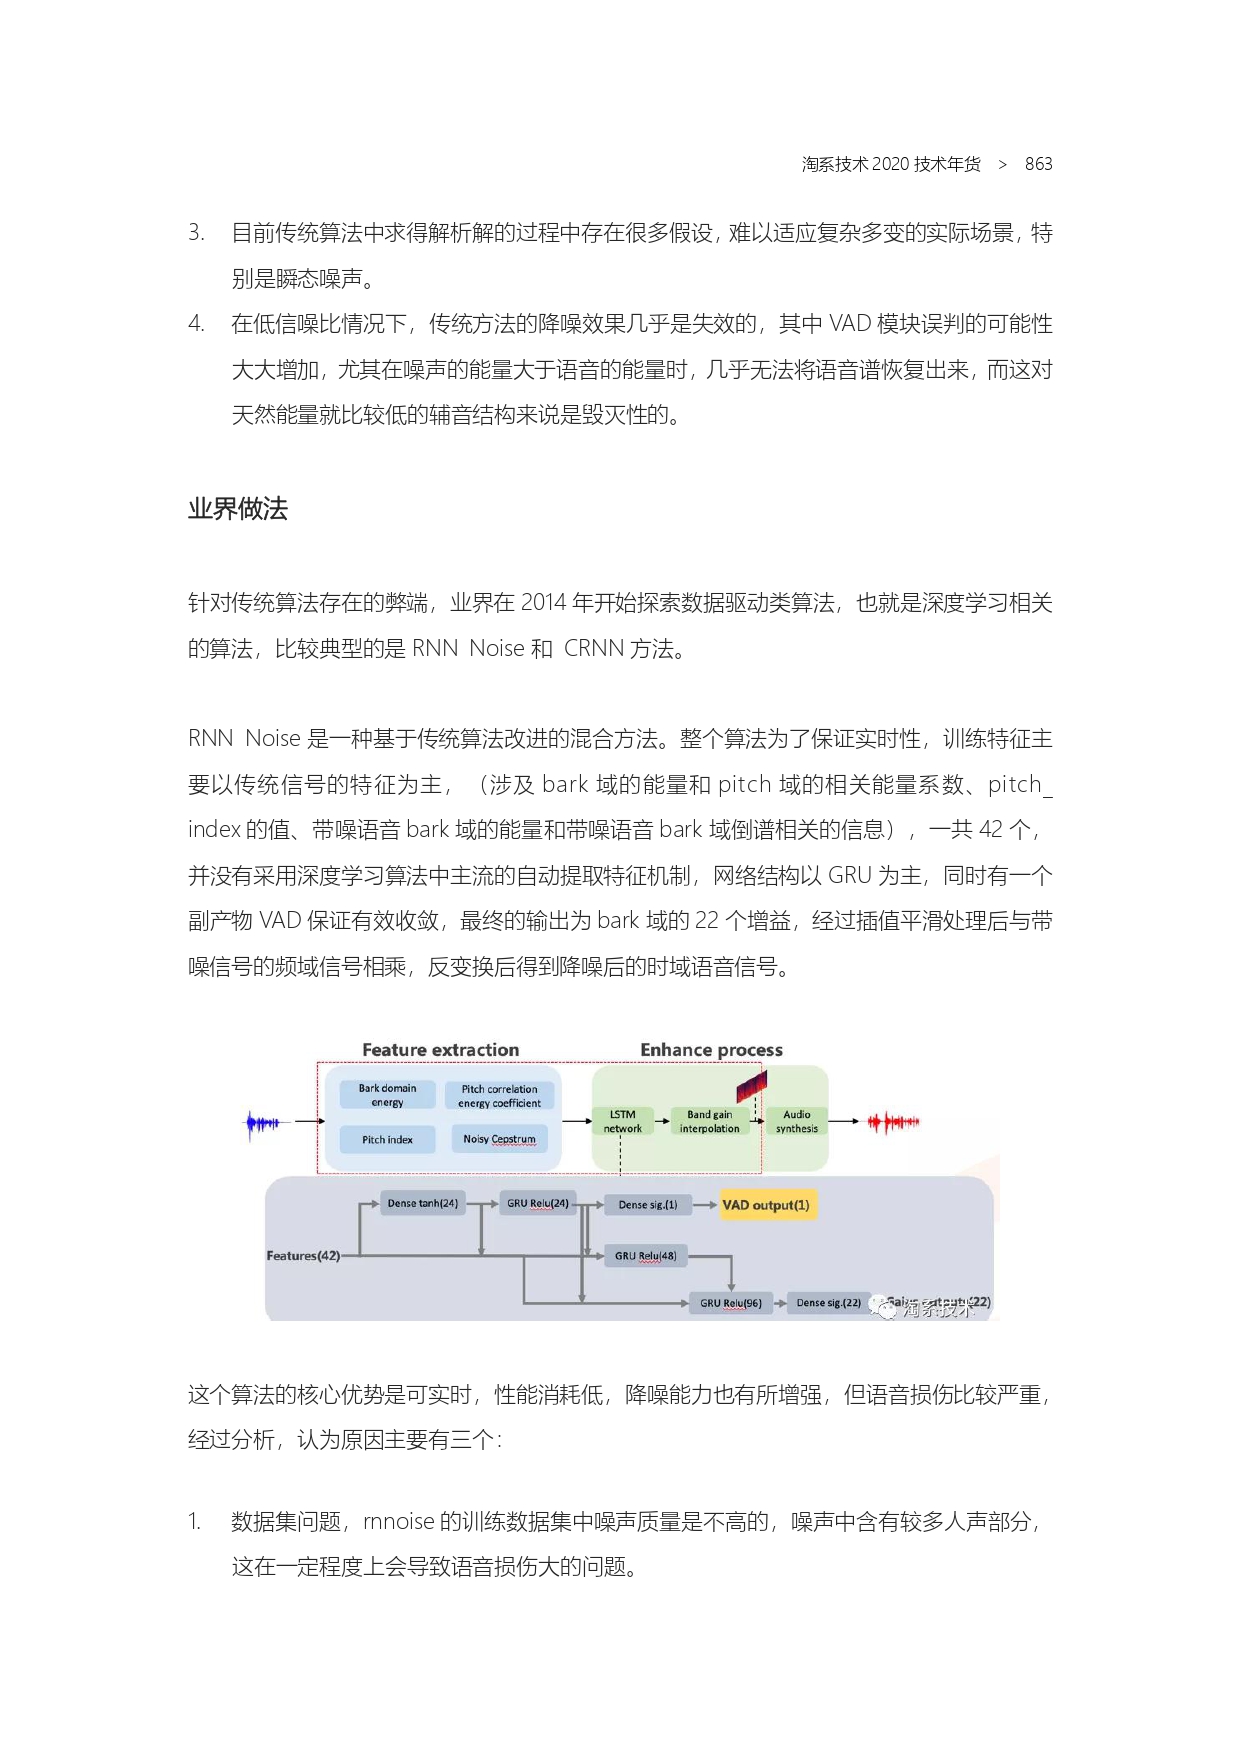 The Complete Works of Tao Technology 2020-571-1189-1-300_page-0293.jpg